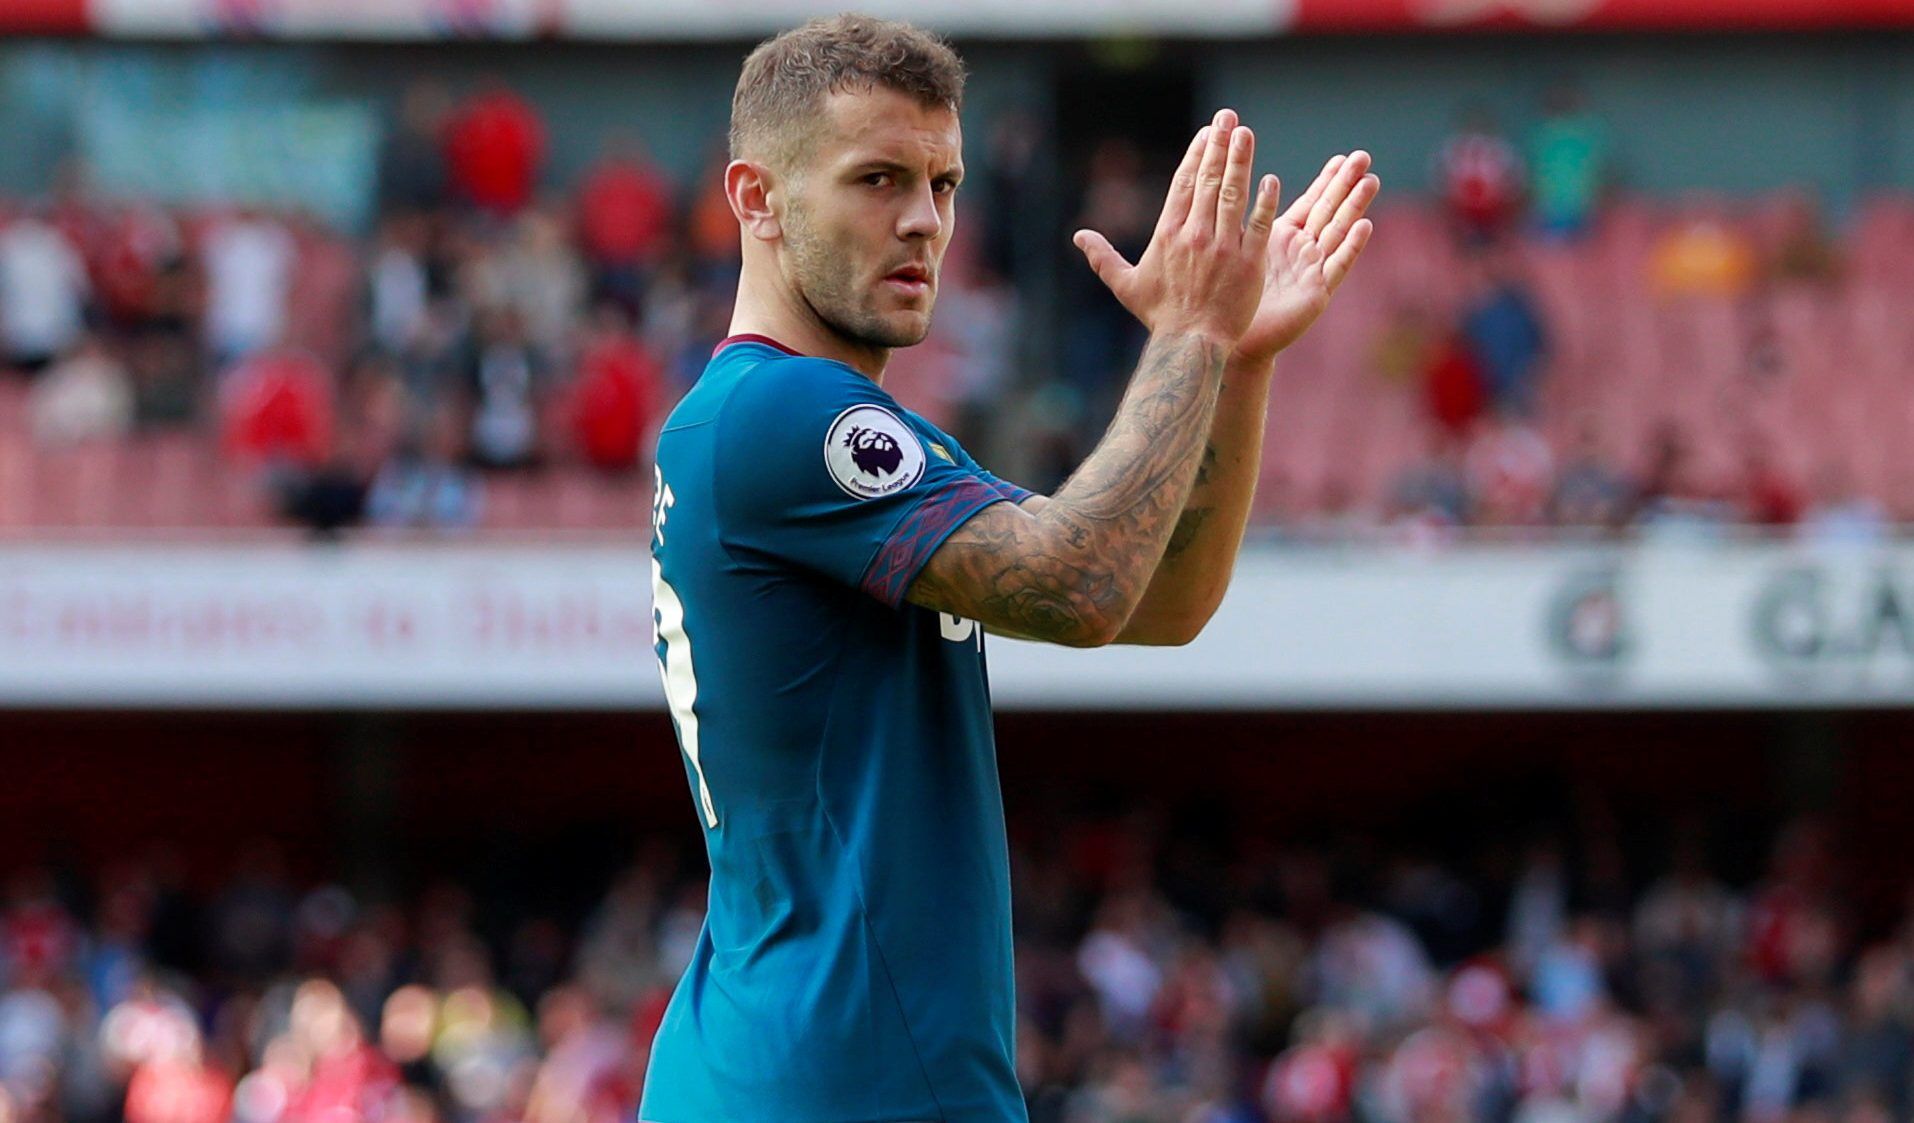 Soccer Football - Premier League - Arsenal v West Ham United - Emirates Stadium, London, Britain - August 25, 2018  West Ham's Jack Wilshere applauds the fans after the match  Action Images via Reuters/Andrew Couldridge  EDITORIAL USE ONLY. No use with unauthorized audio, video, data, fixture lists, club/league logos or 